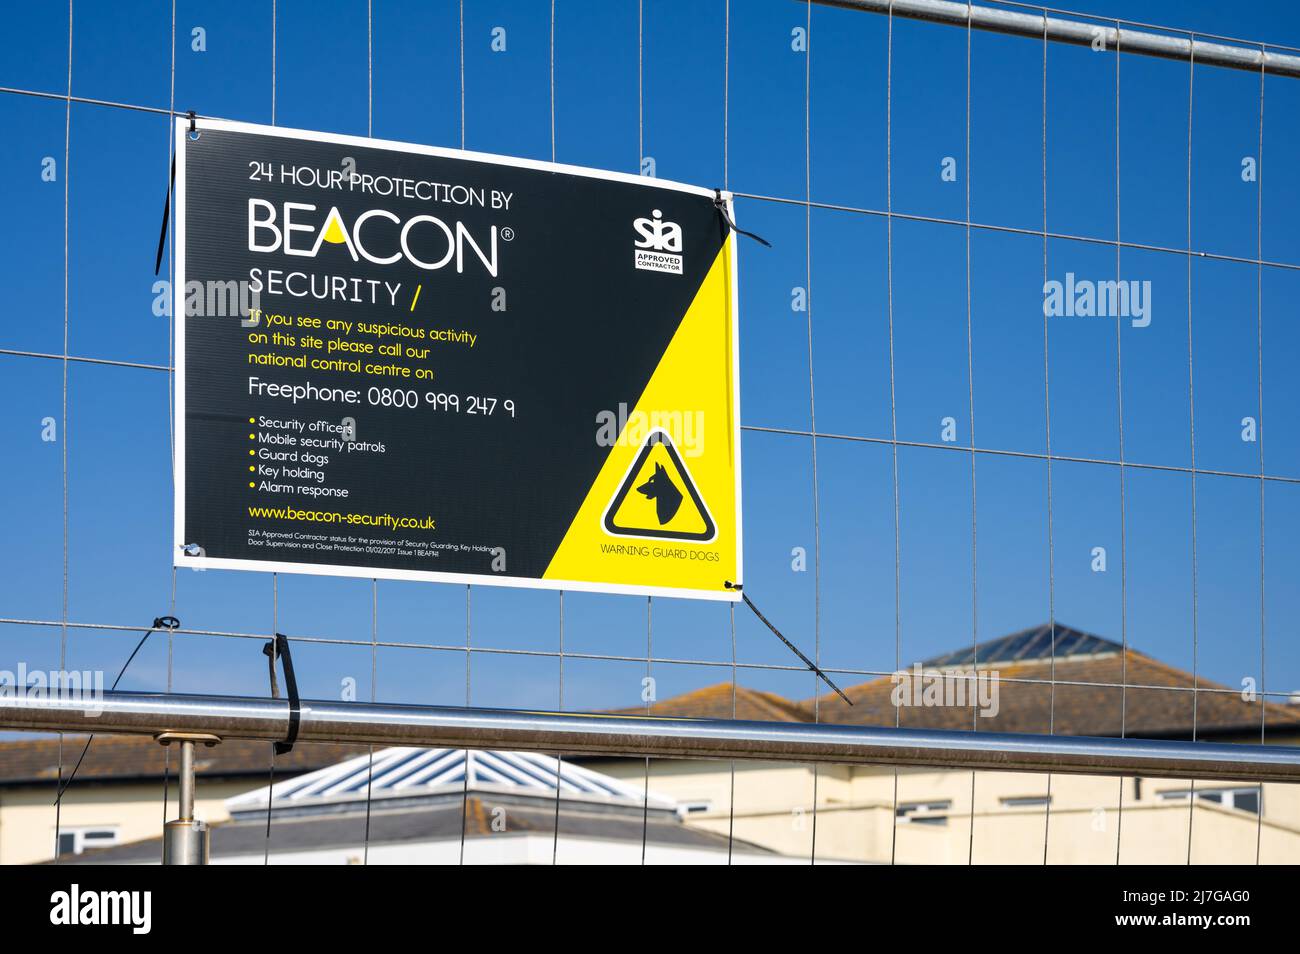 Beacon security sign on a fence for a site giving 24 hour protection in England, UK. Stock Photo